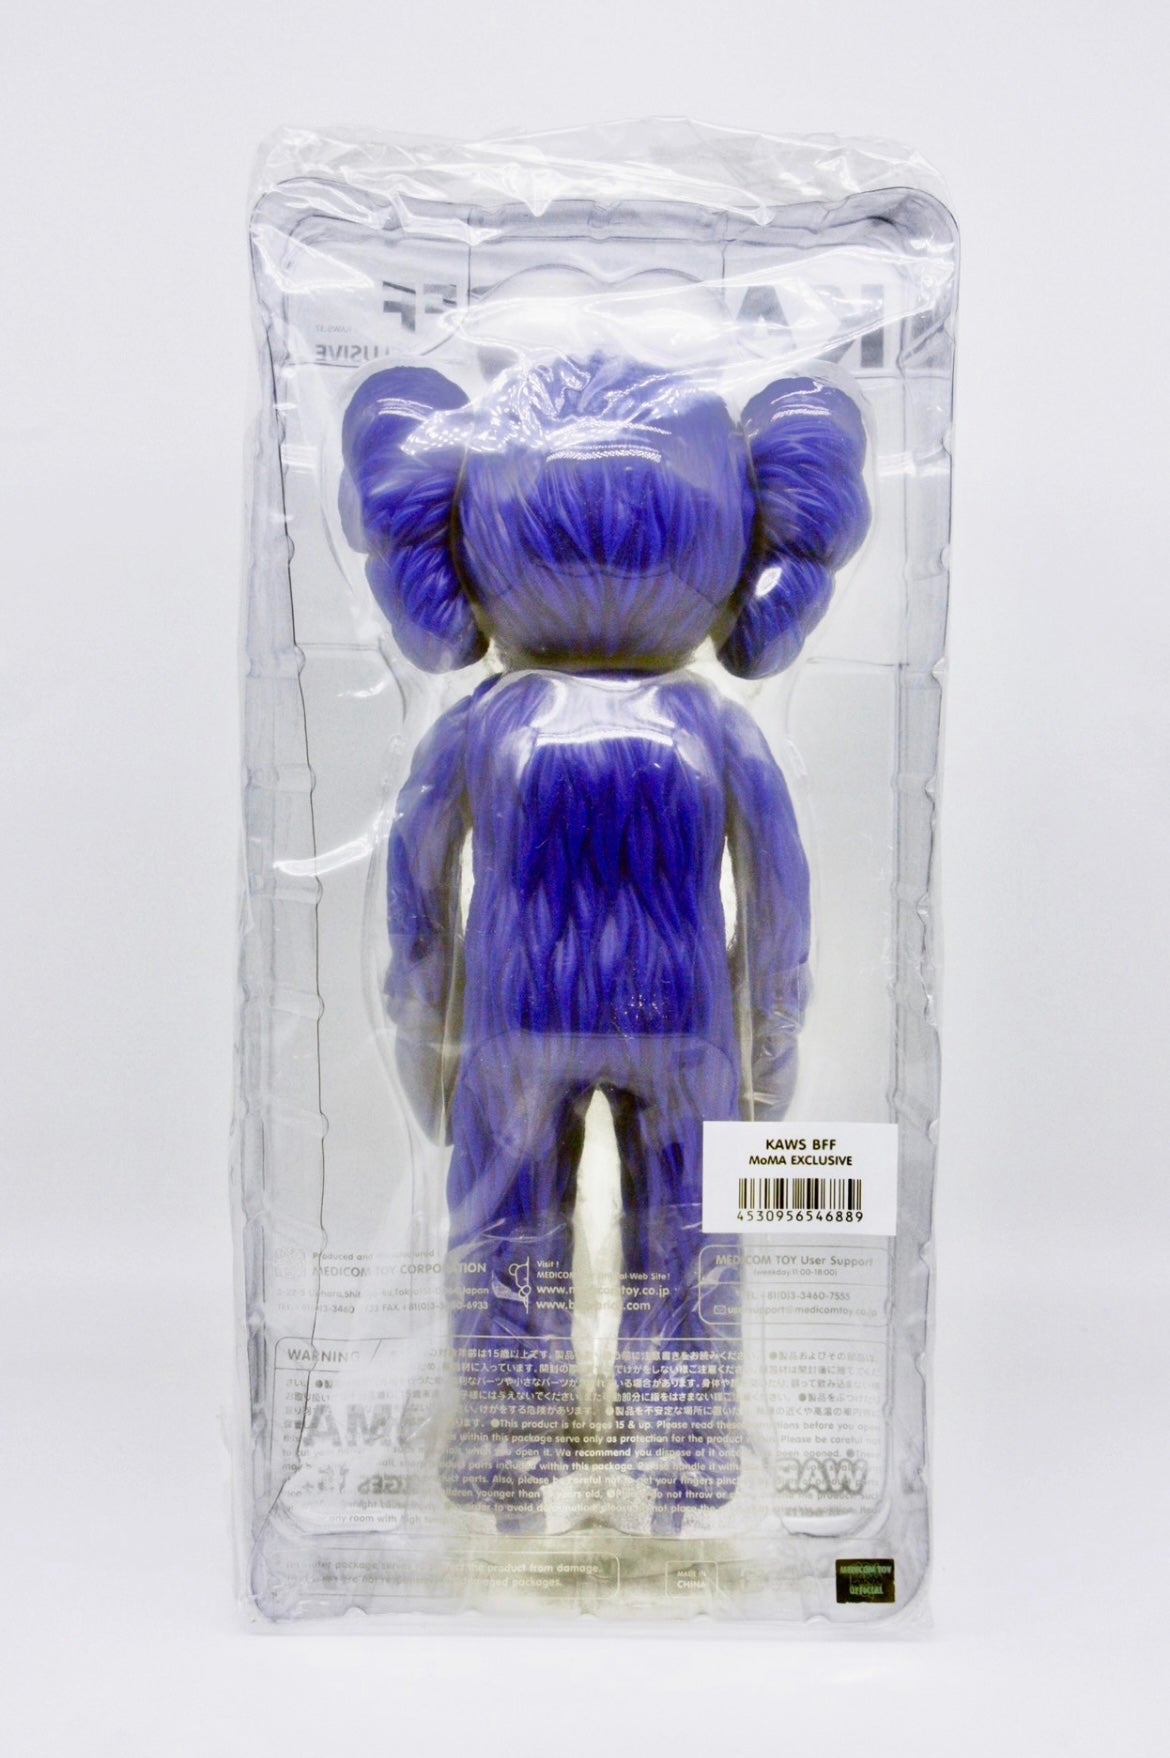 KAWS BFF Open Edition Vinyl Figure Blue MoMa store exclusive